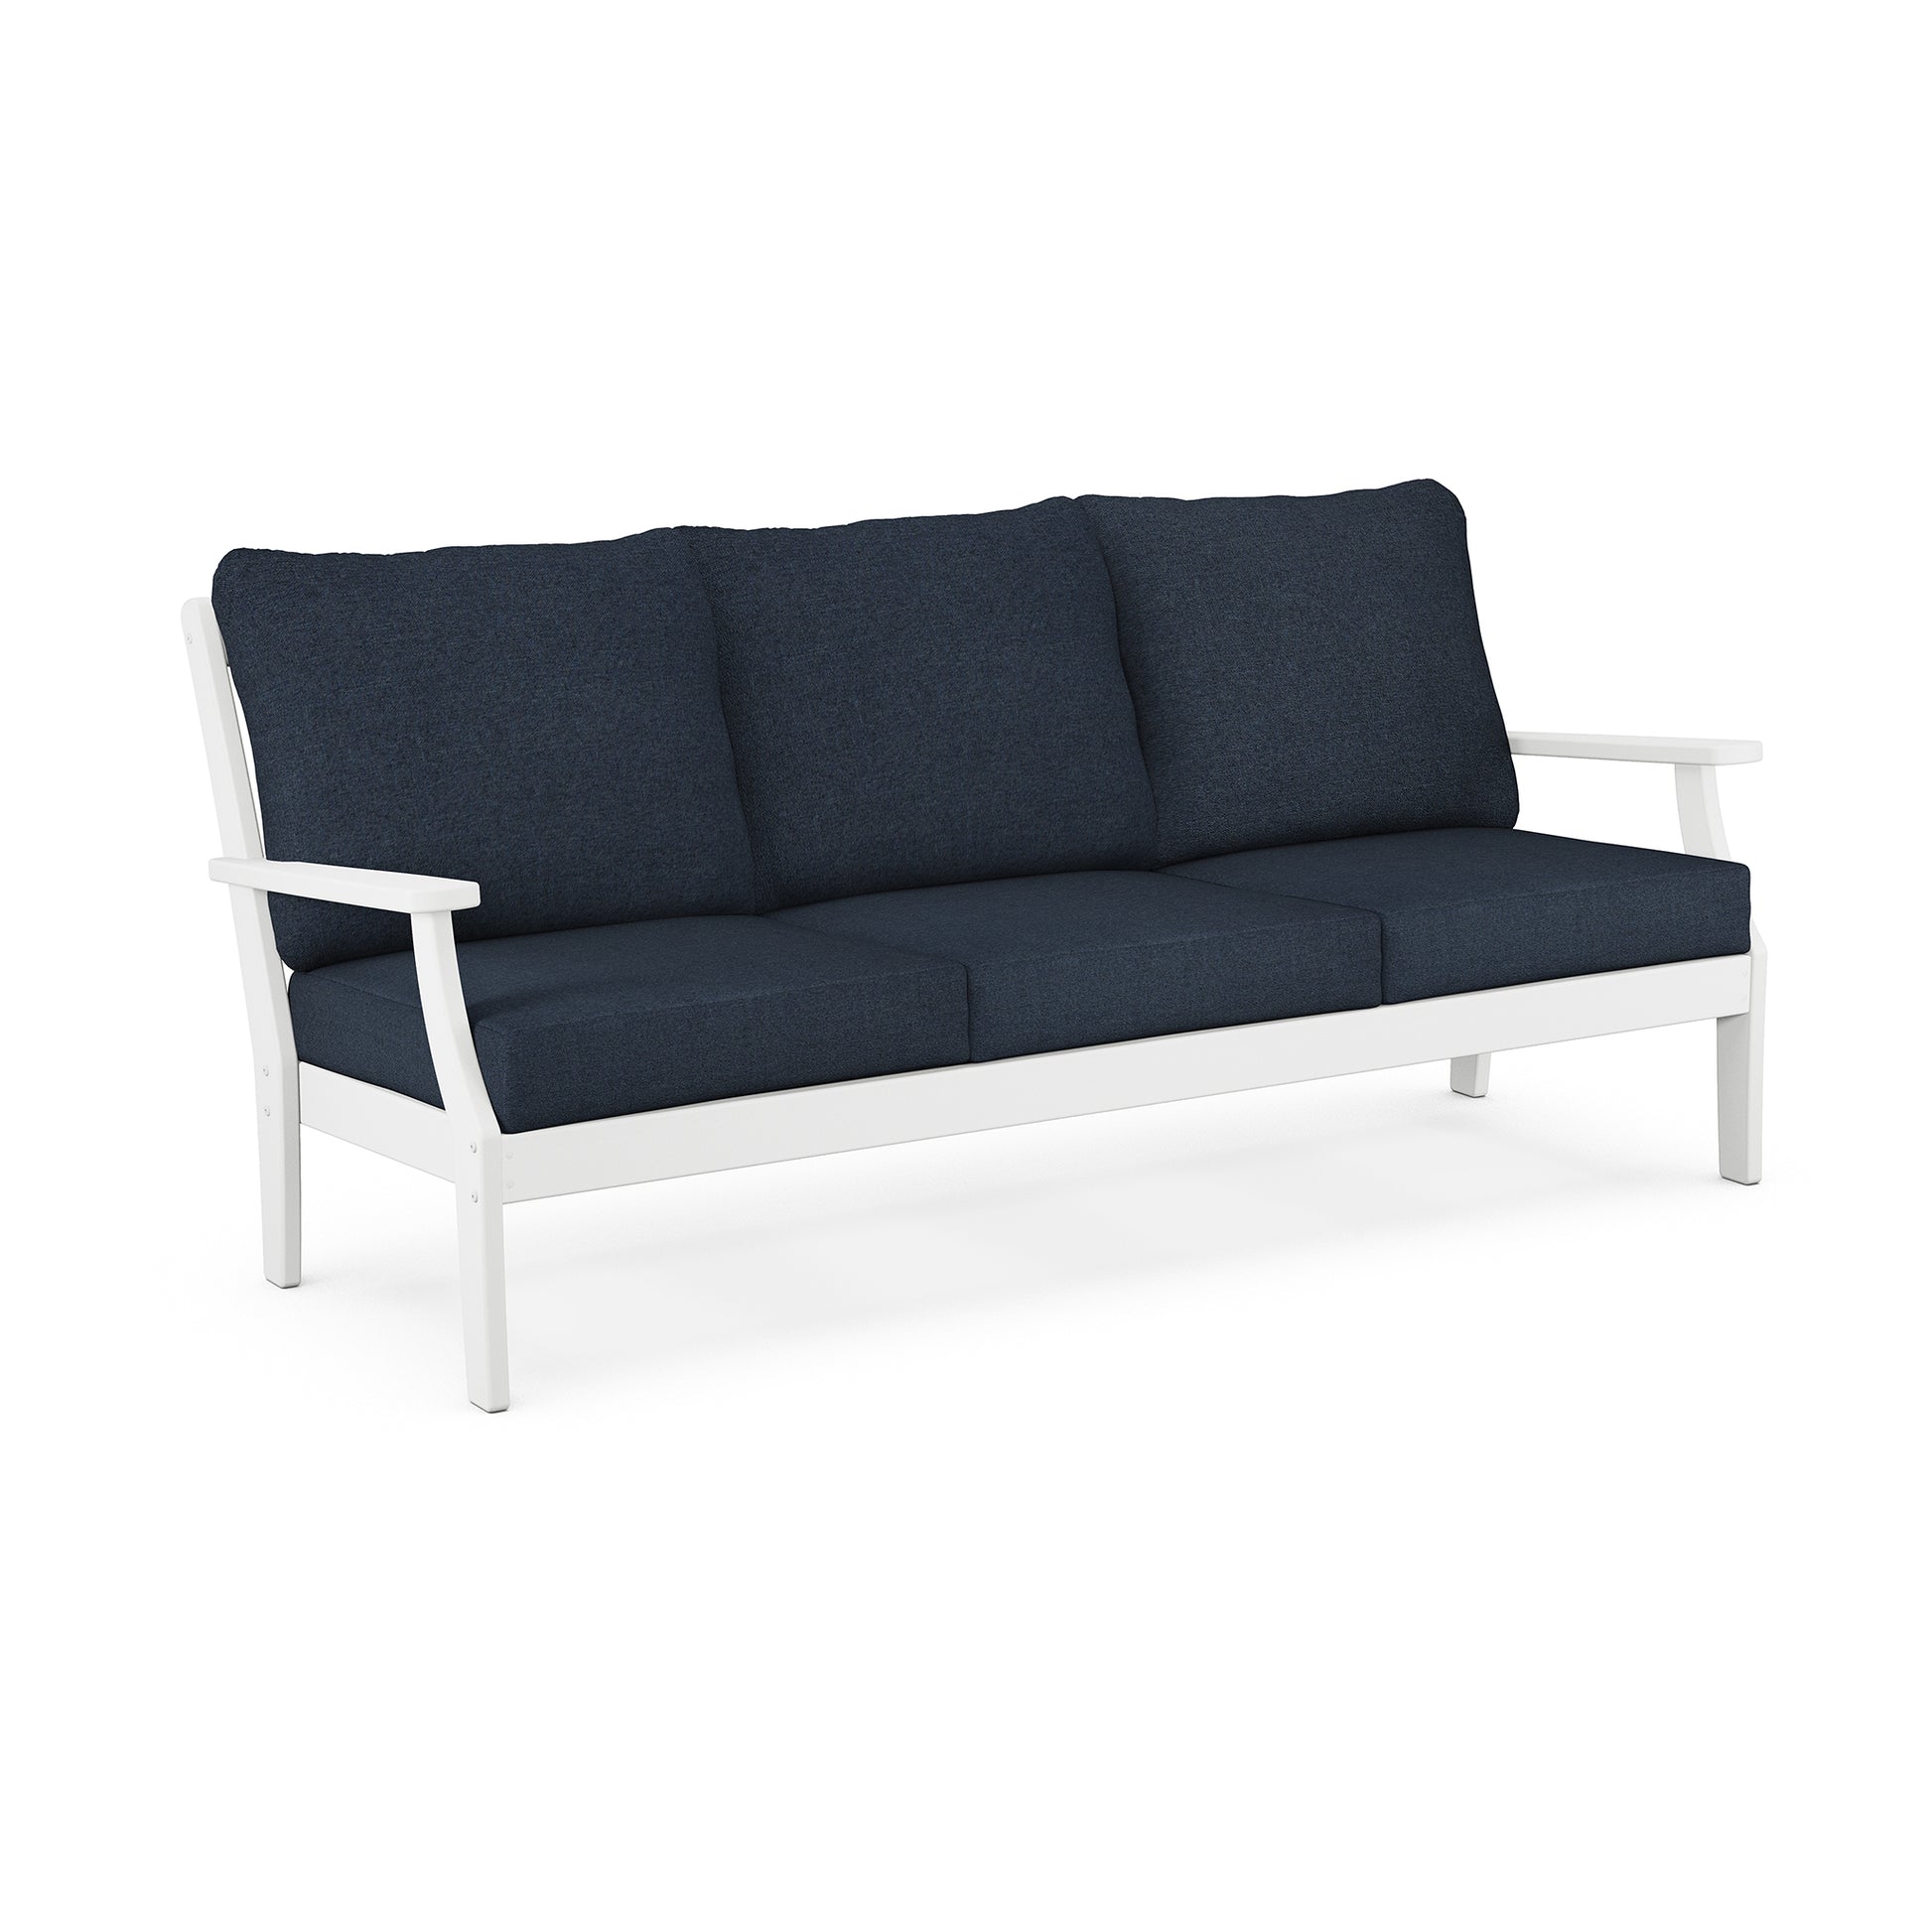 A modern three-seater outdoor sofa with a white POLYWOOD Braxton frame and deep blue cushions, isolated on a white background.